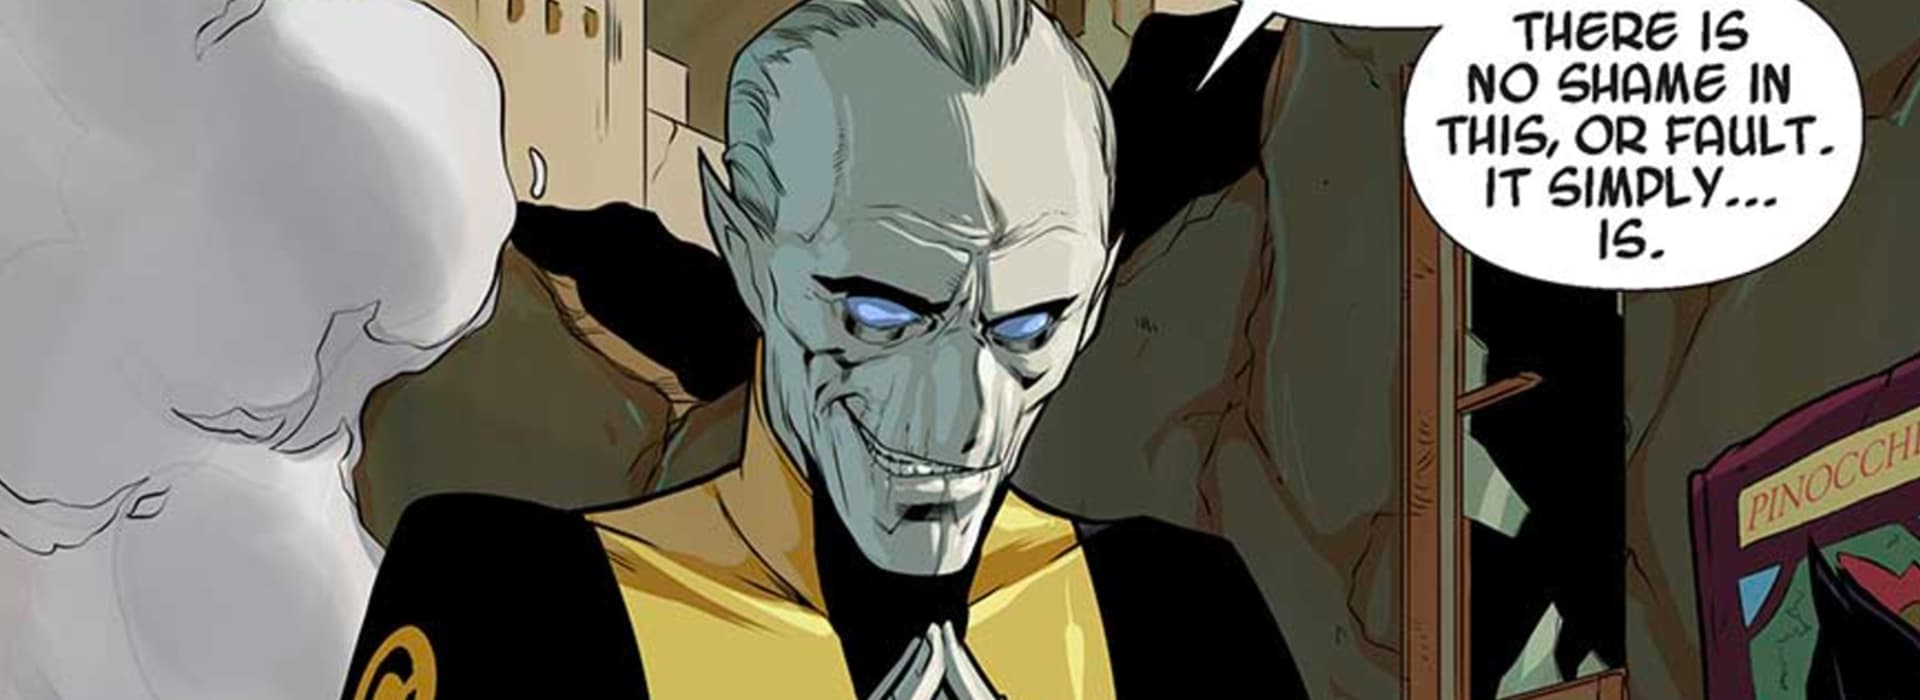 Ebony Maw In Comics Full Report Page Divider